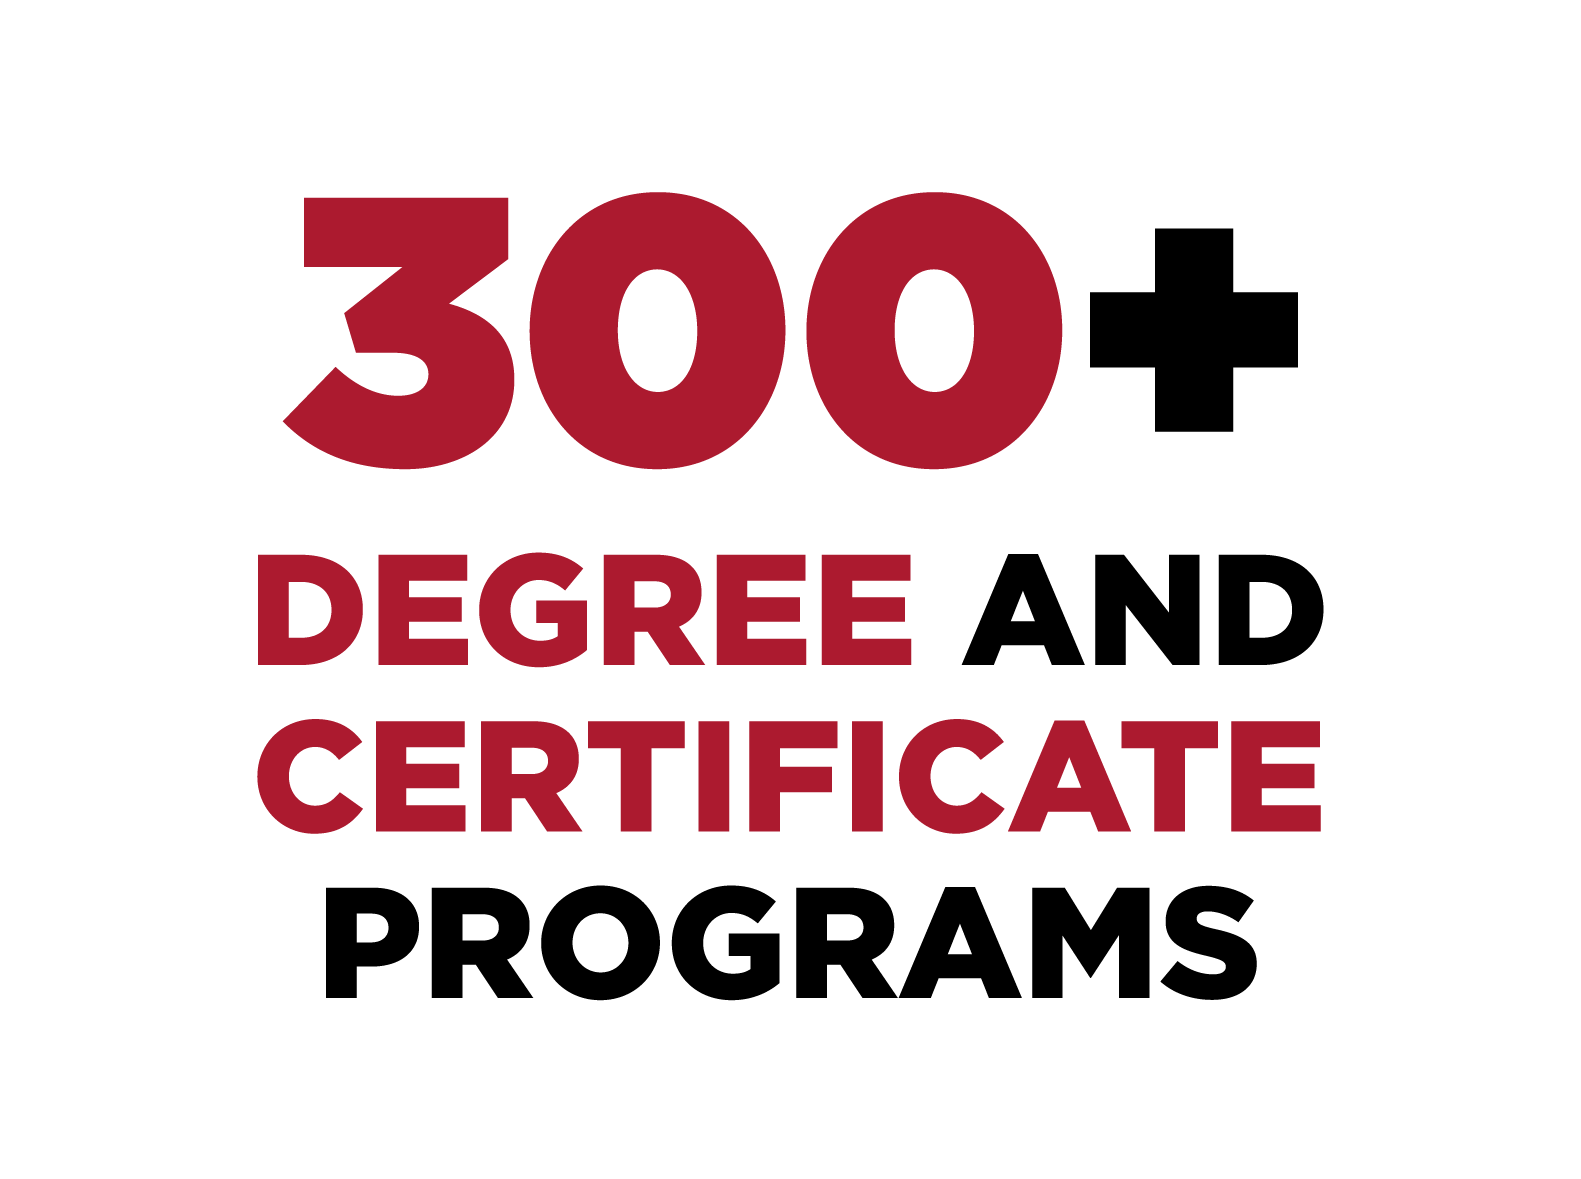 300+ Degree and Certificate Programs